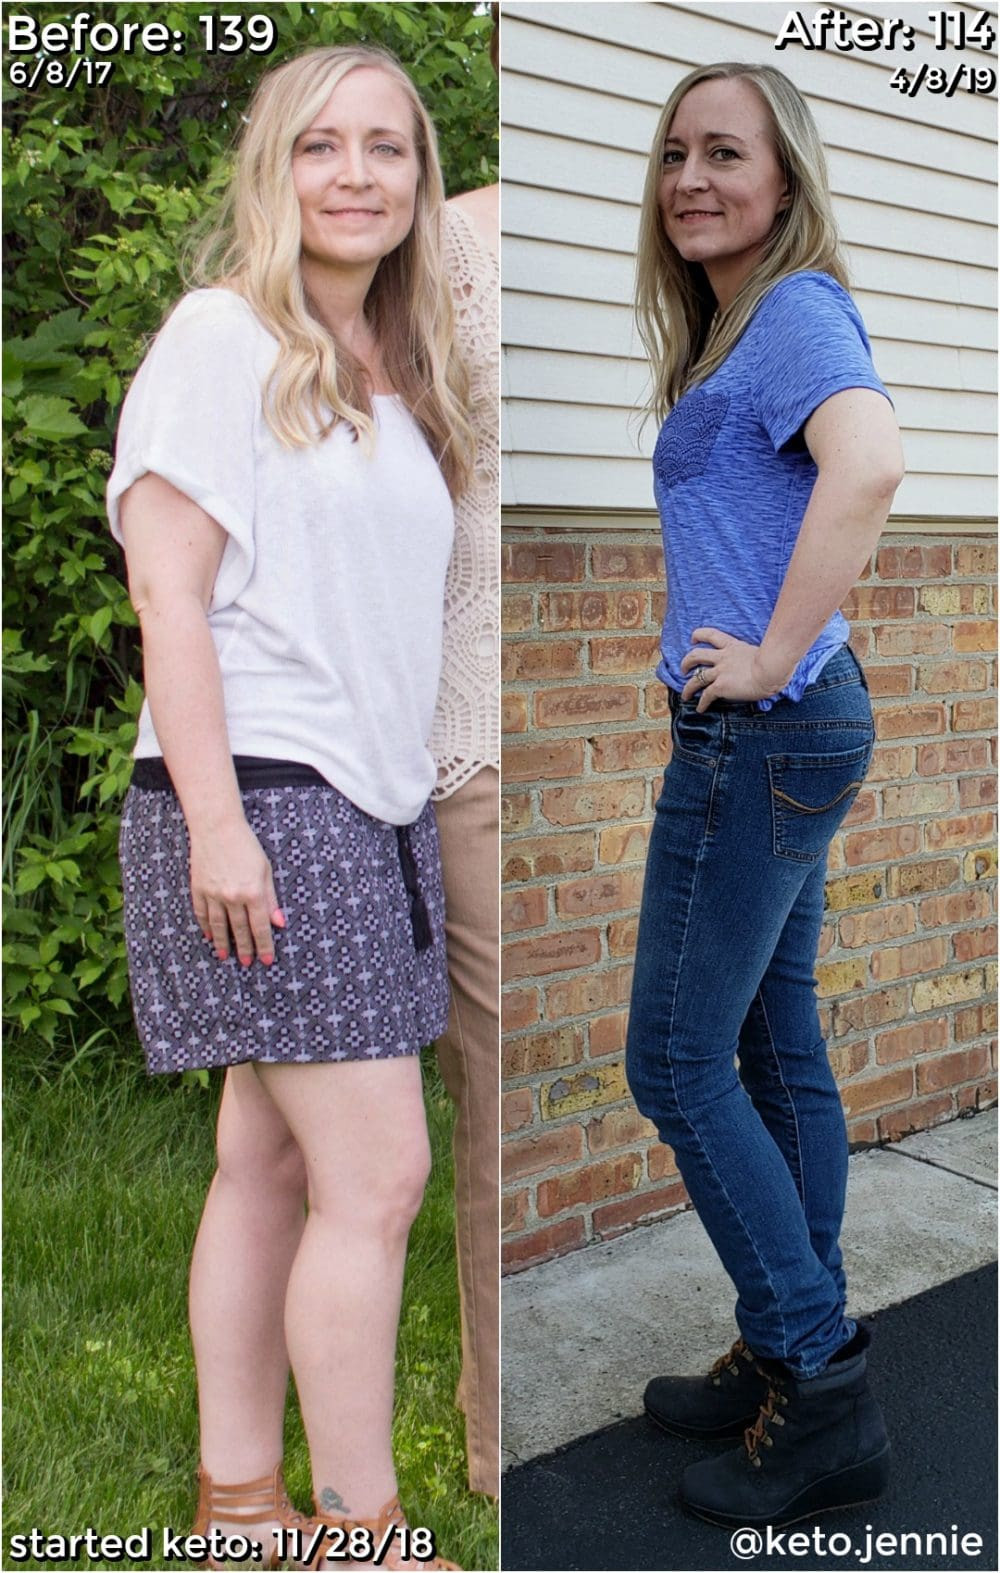 Keto Diet Before And After Images
 My Personal Experience with the Keto Diet